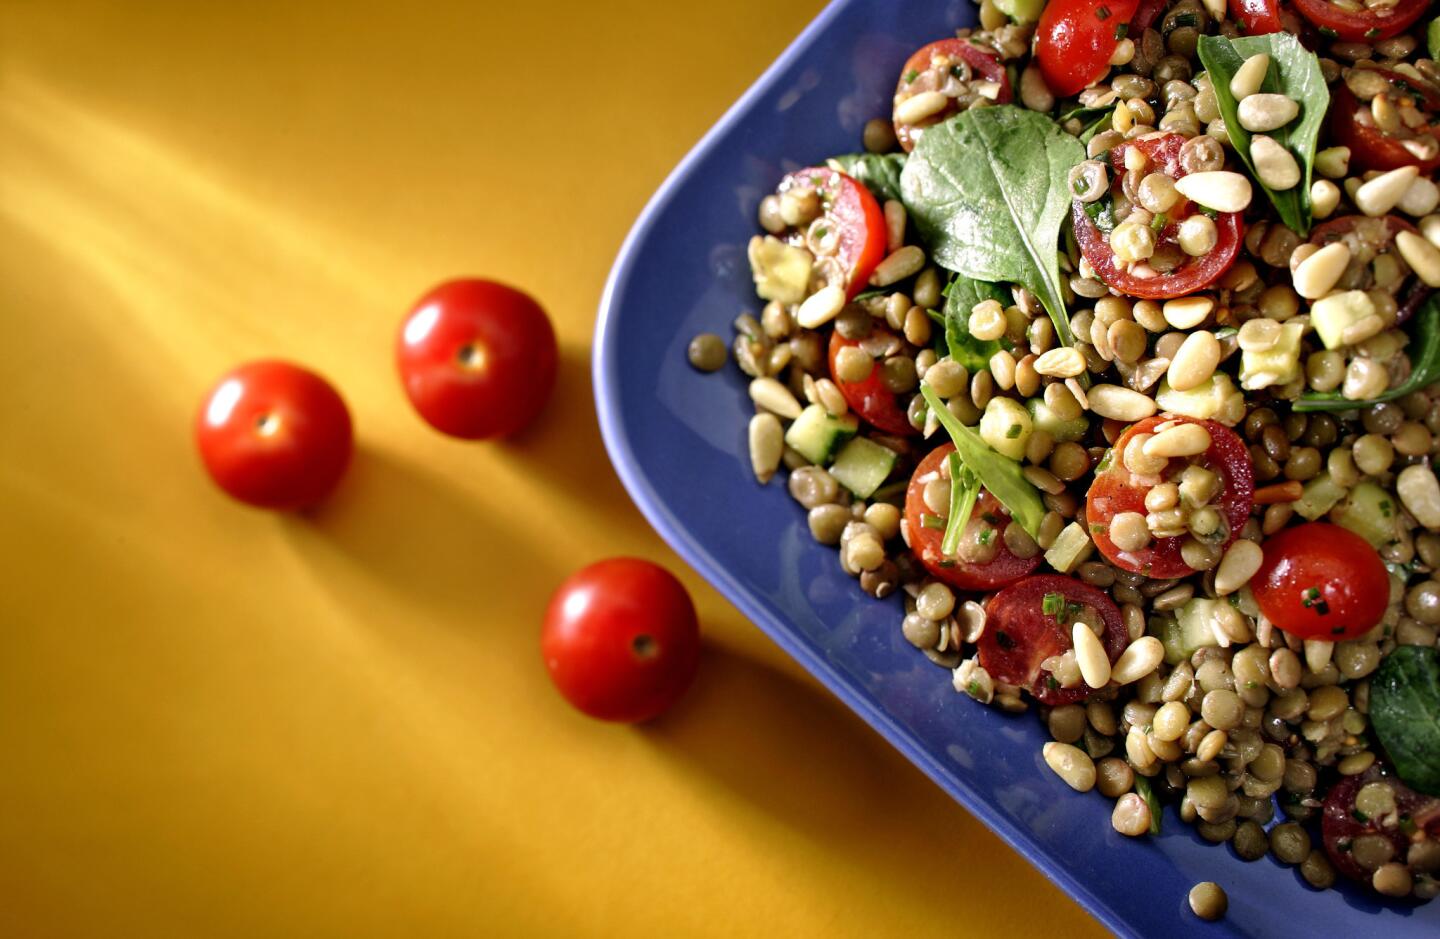 Recipe: Lentil salad with tomatoes, zucchini and arugula